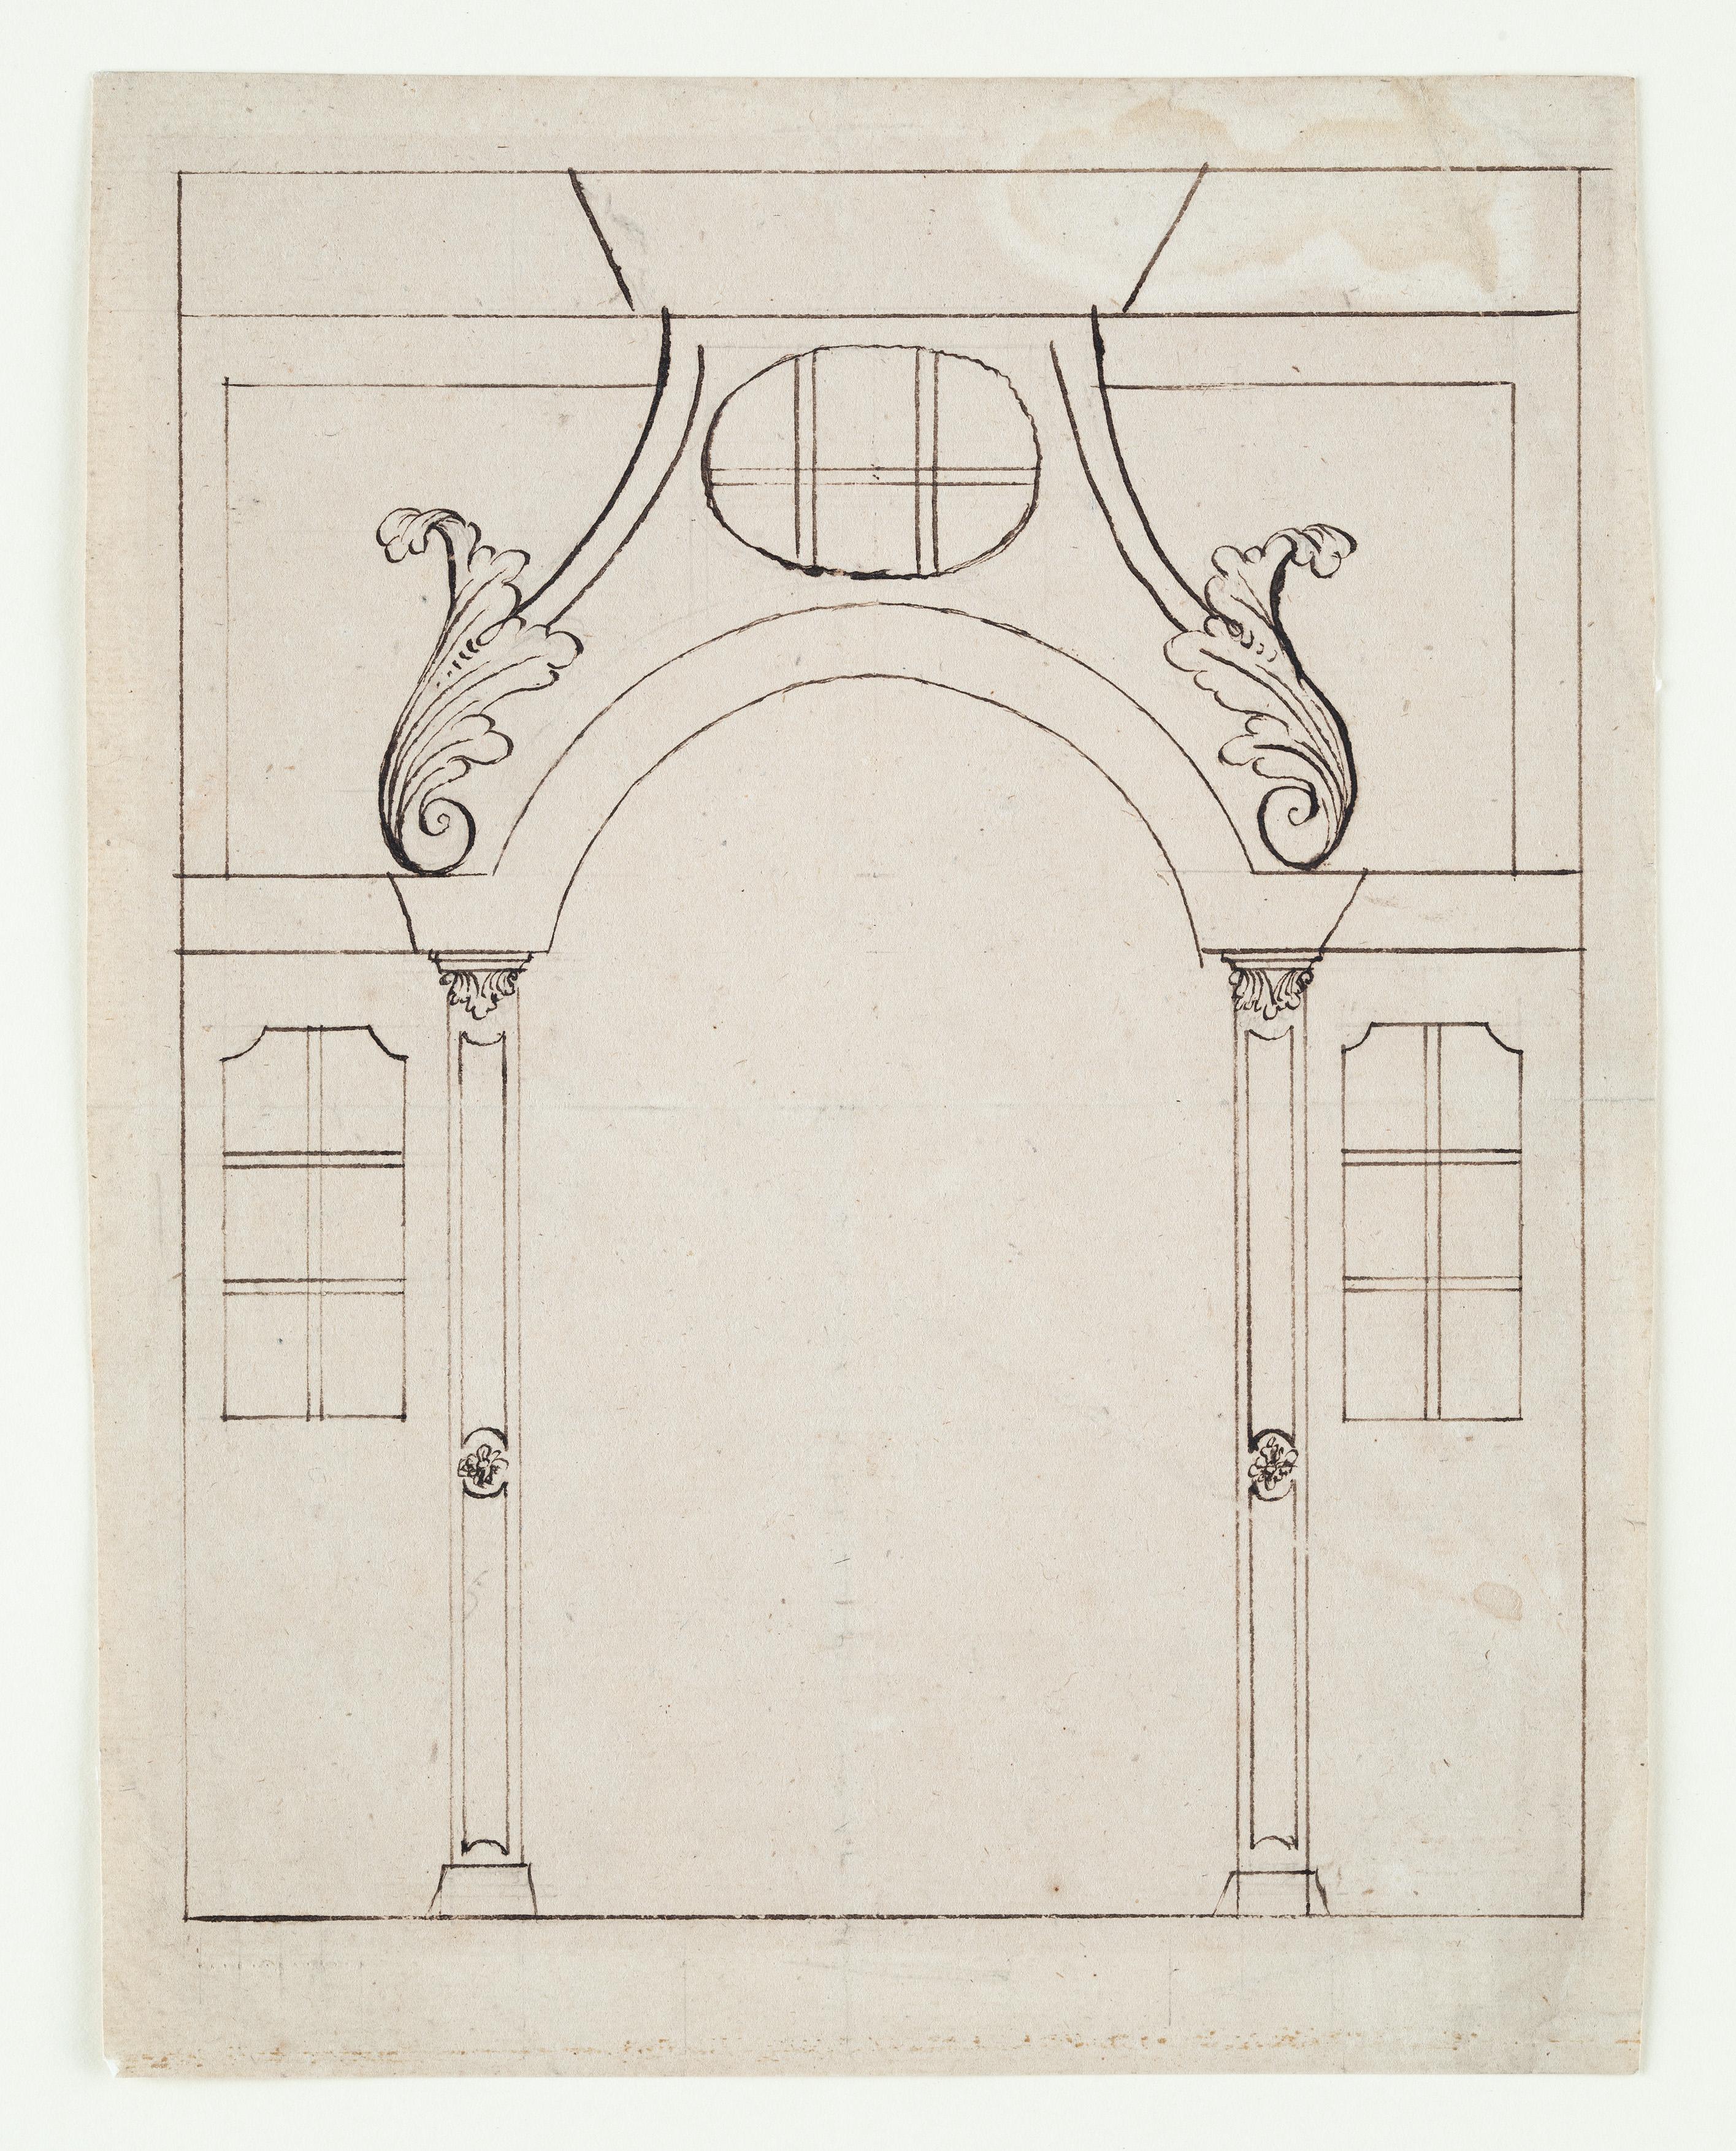 Sketch for an Architecture, Old Master Drawing, 17th Century, Italian Art